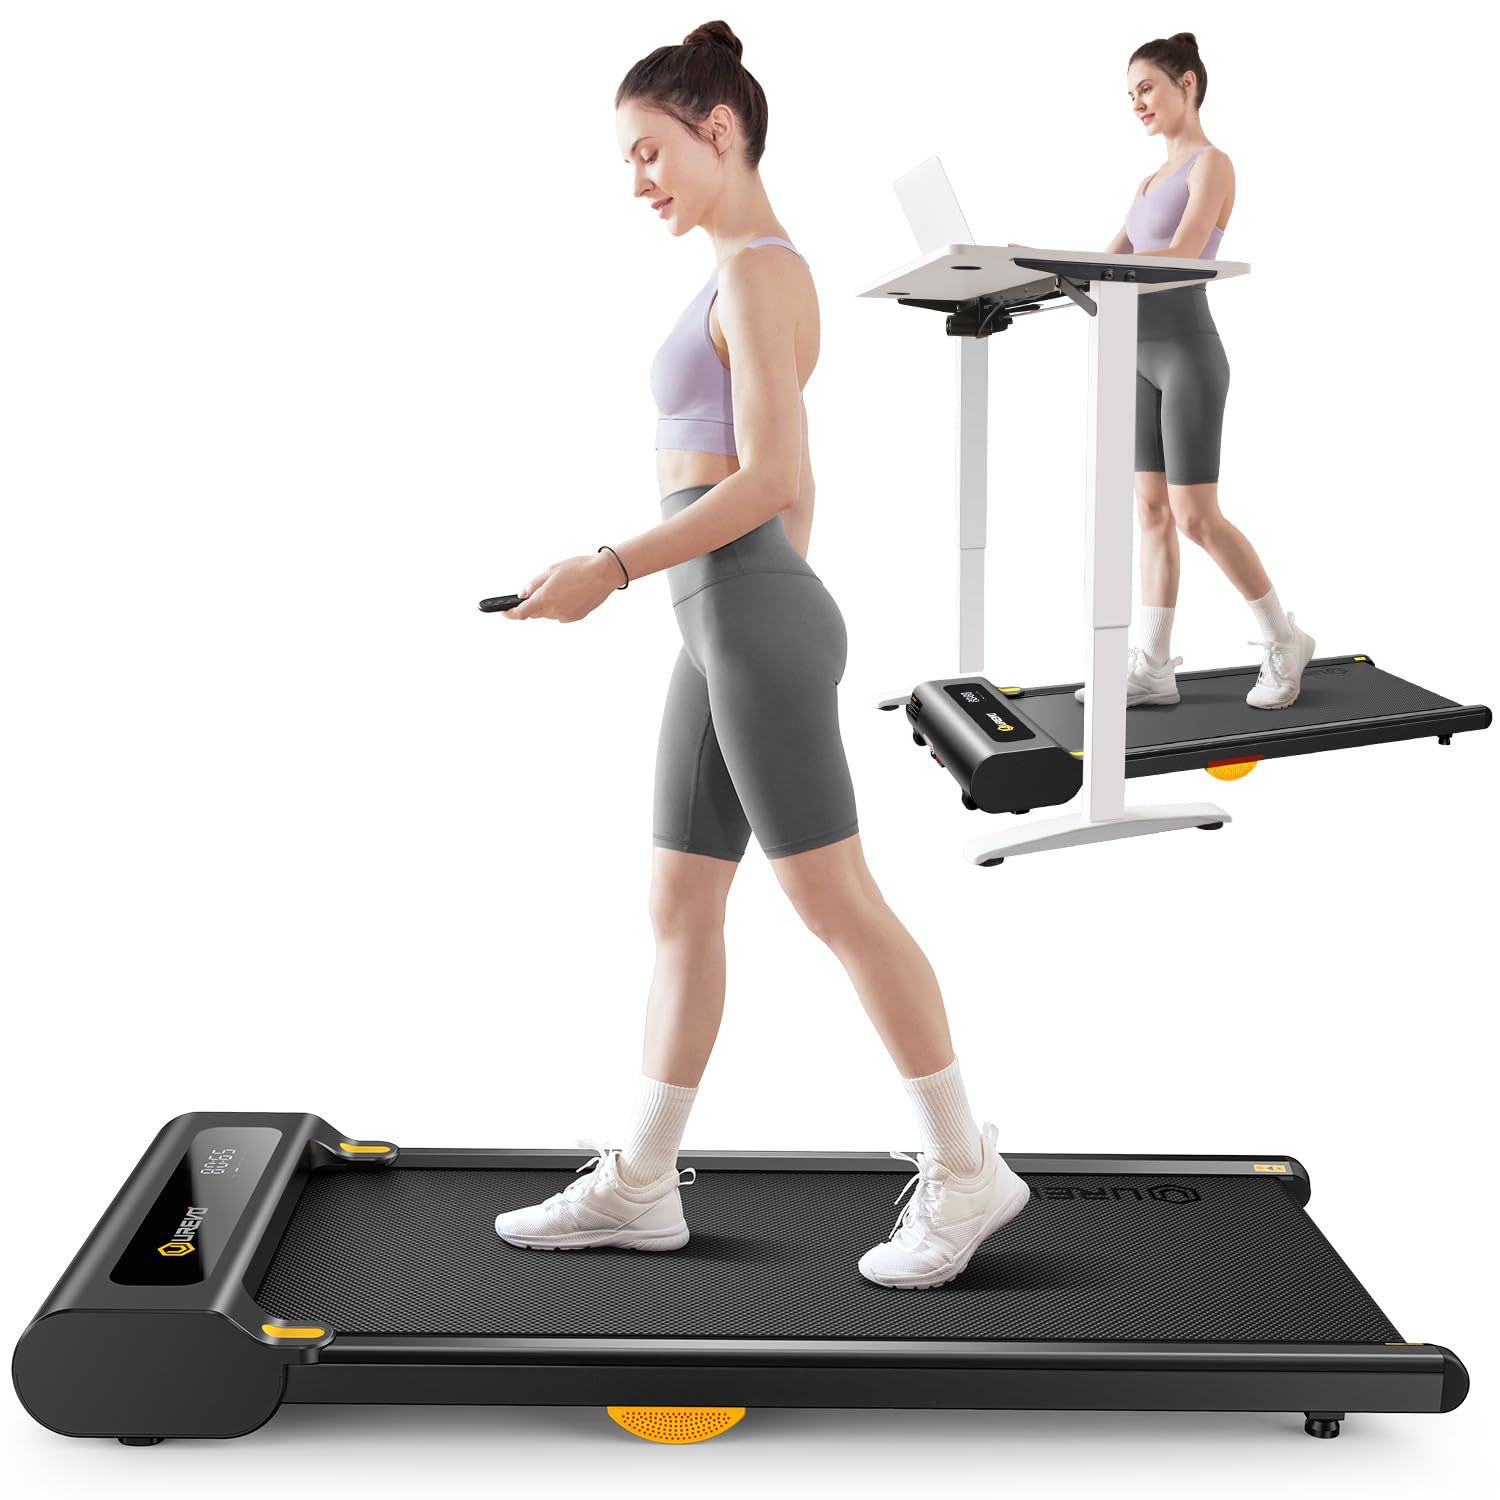 Primary image for Under Desk Treadmill, Walking Pad For Home/Office, Portable Walking Treadmill 2.